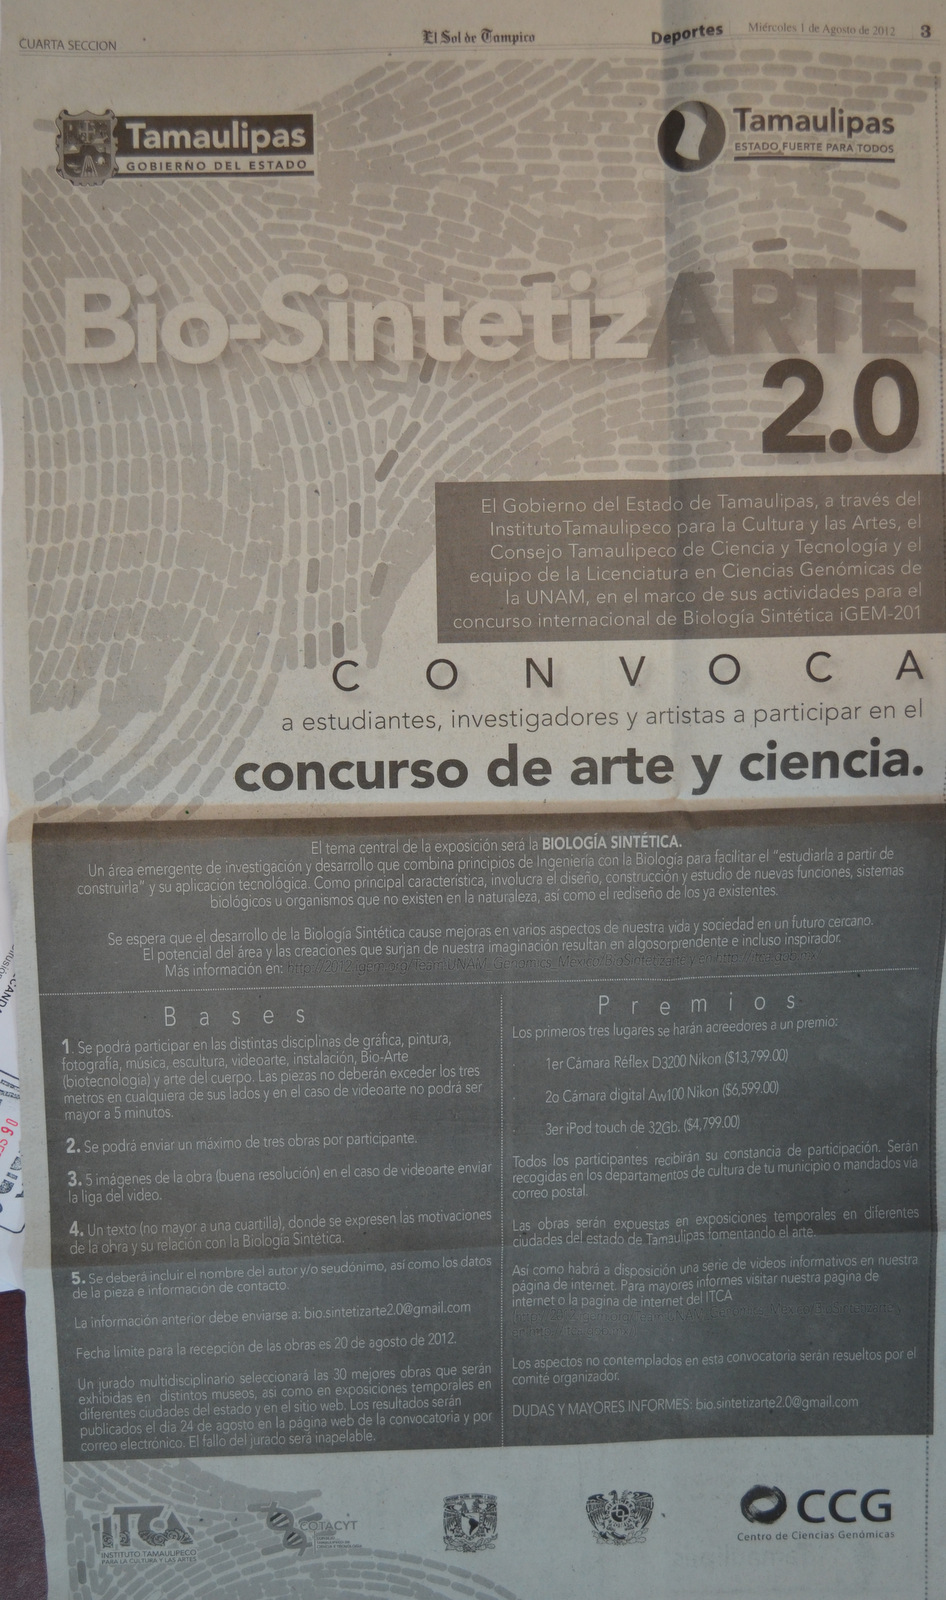 Newspaper "El Sol de Tampico" published 1 august 2012 visible in North East of Mexico